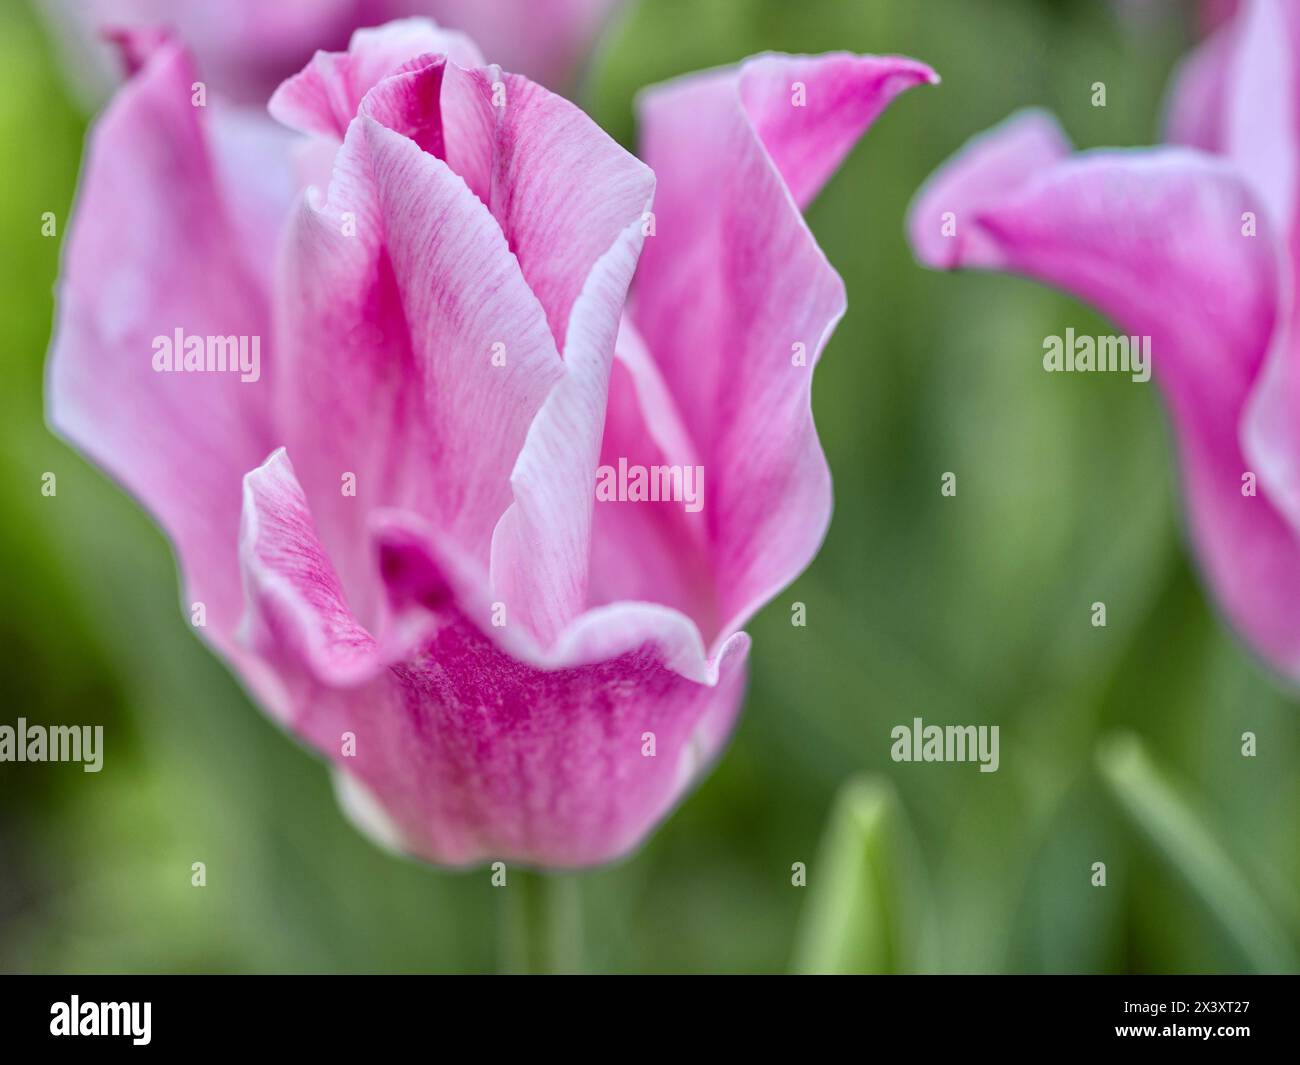 Pink tulips in the spring garden. Shallow depth of field. Stock Photo